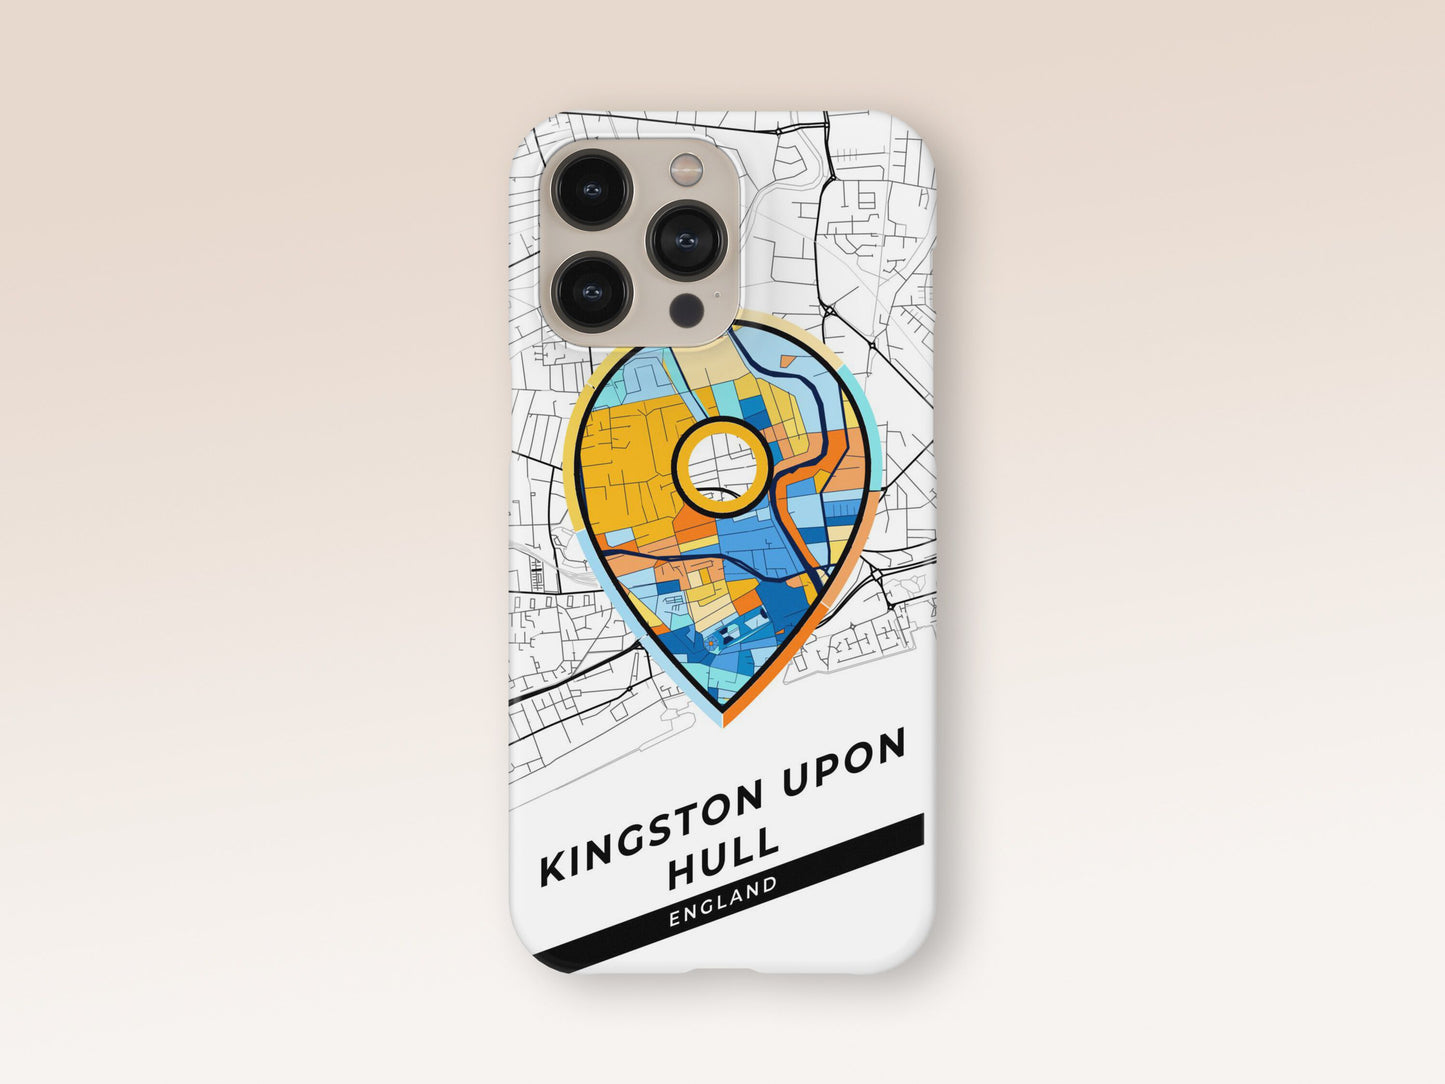 Kingston Upon Hull England slim phone case with colorful icon. Birthday, wedding or housewarming gift. Couple match cases. 1